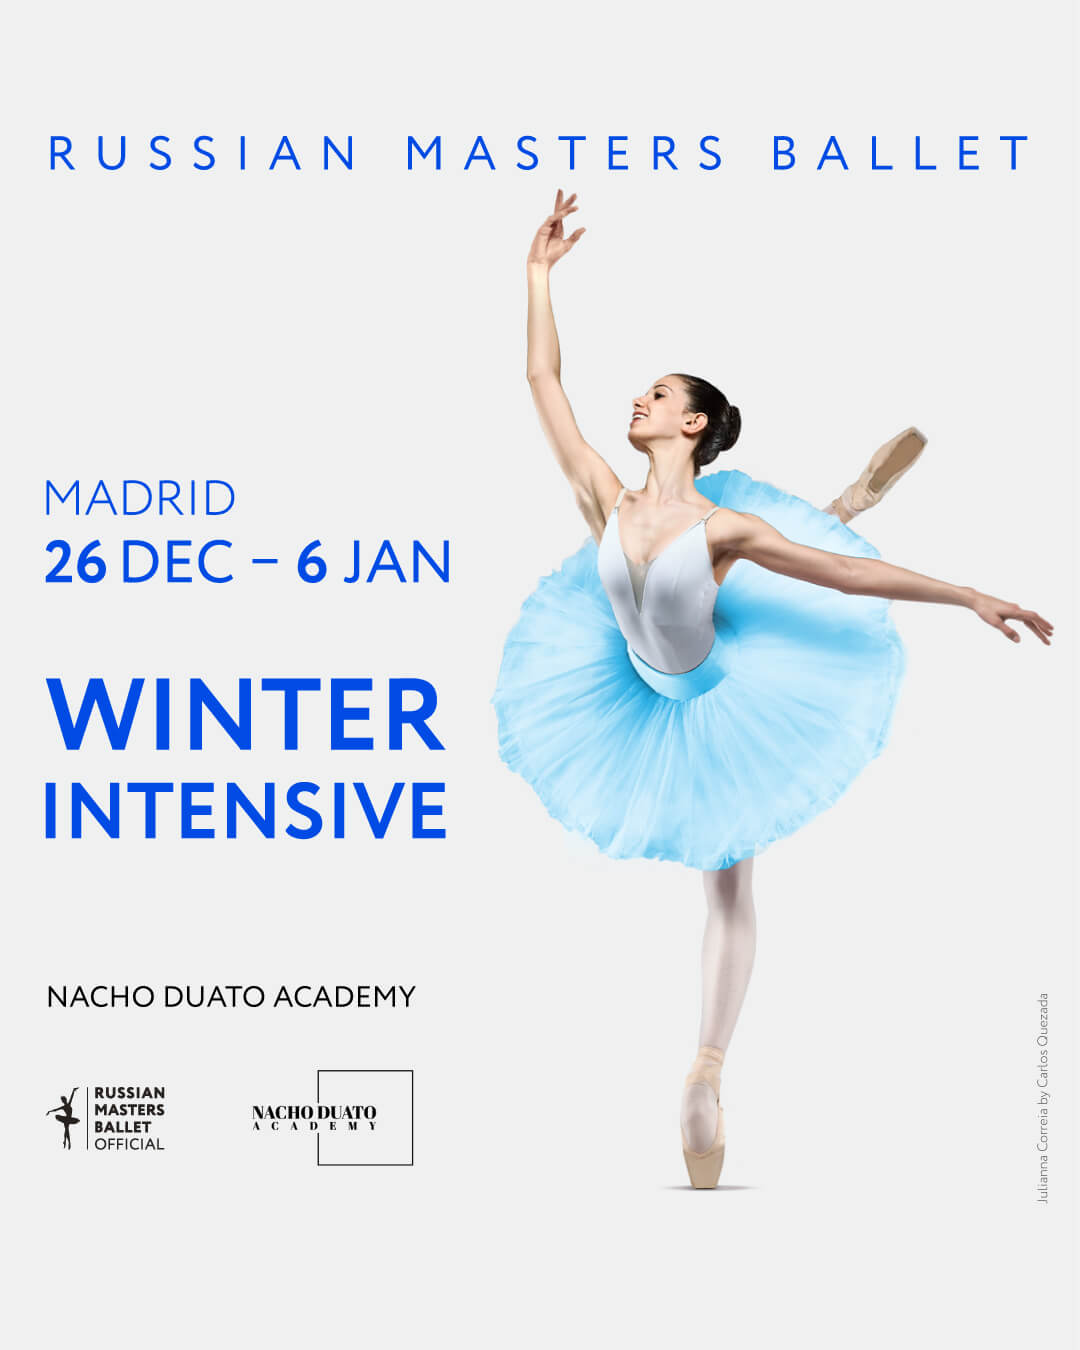 MADRID BALLET EXPERIENCE - RMB WINTER INTENSIVE